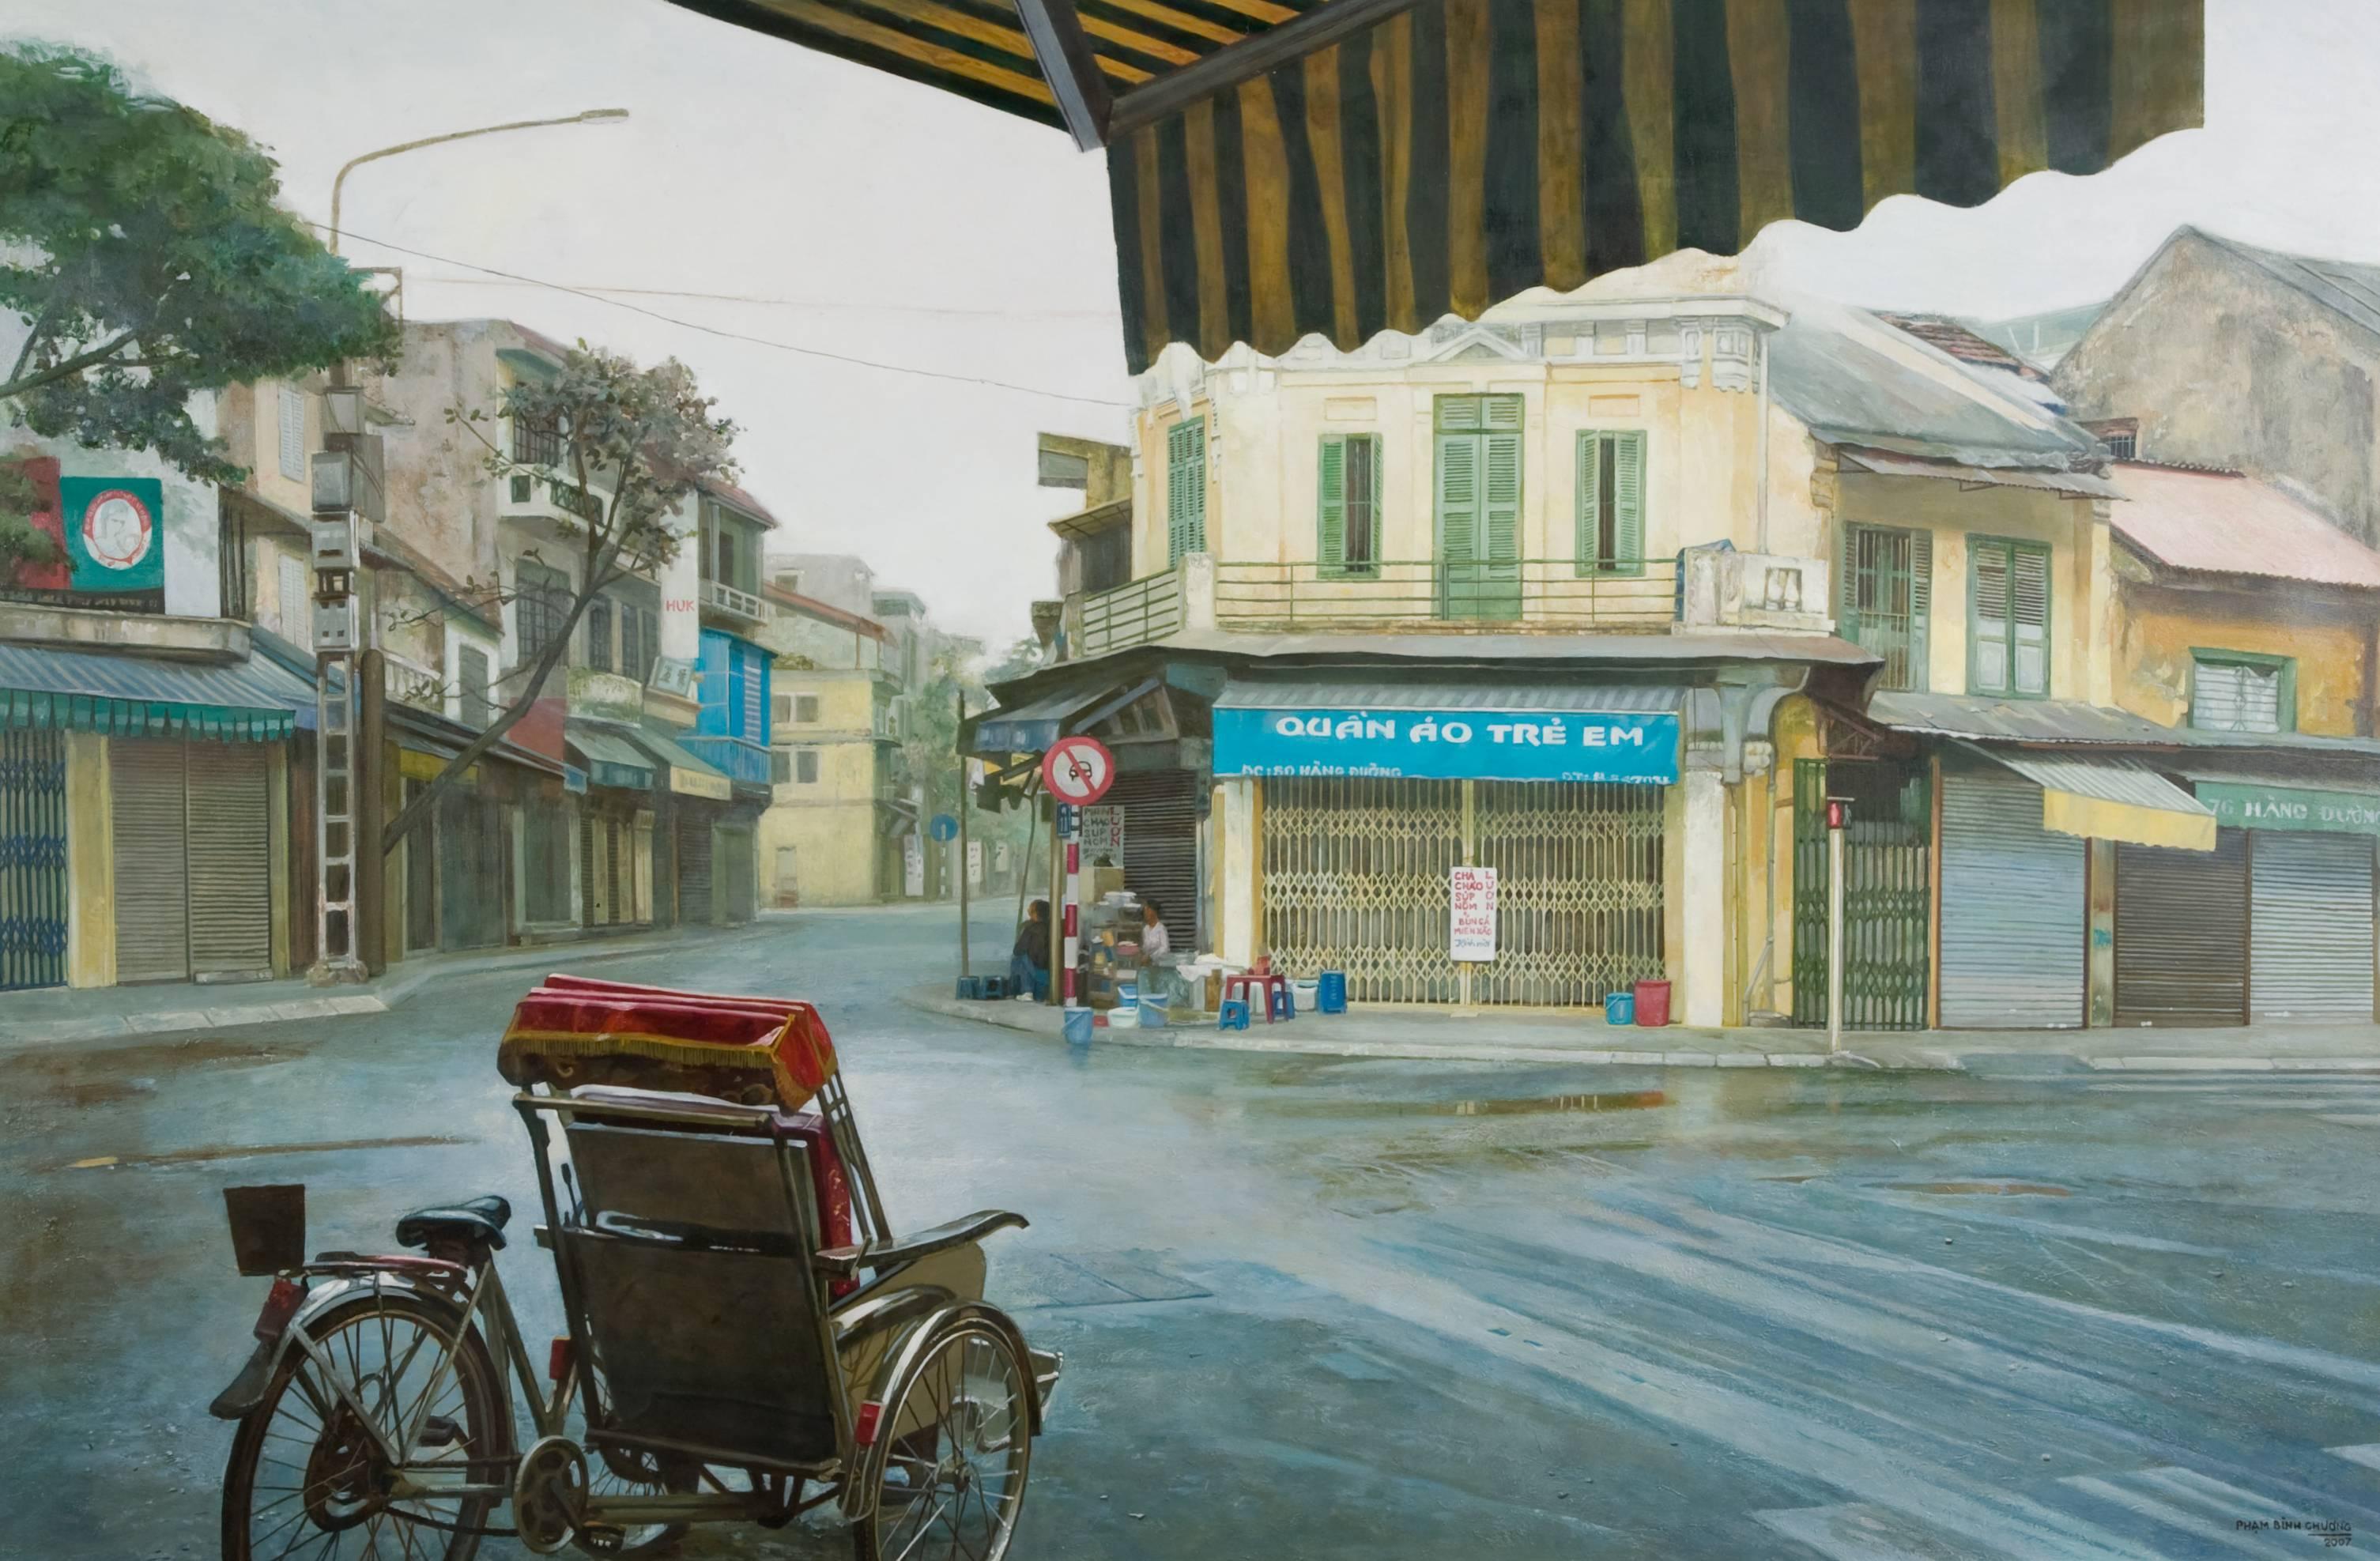 Pham Binh Chuong Landscape Painting - "Buoi Som Dung Street" Oil Painting of a City Street Scene